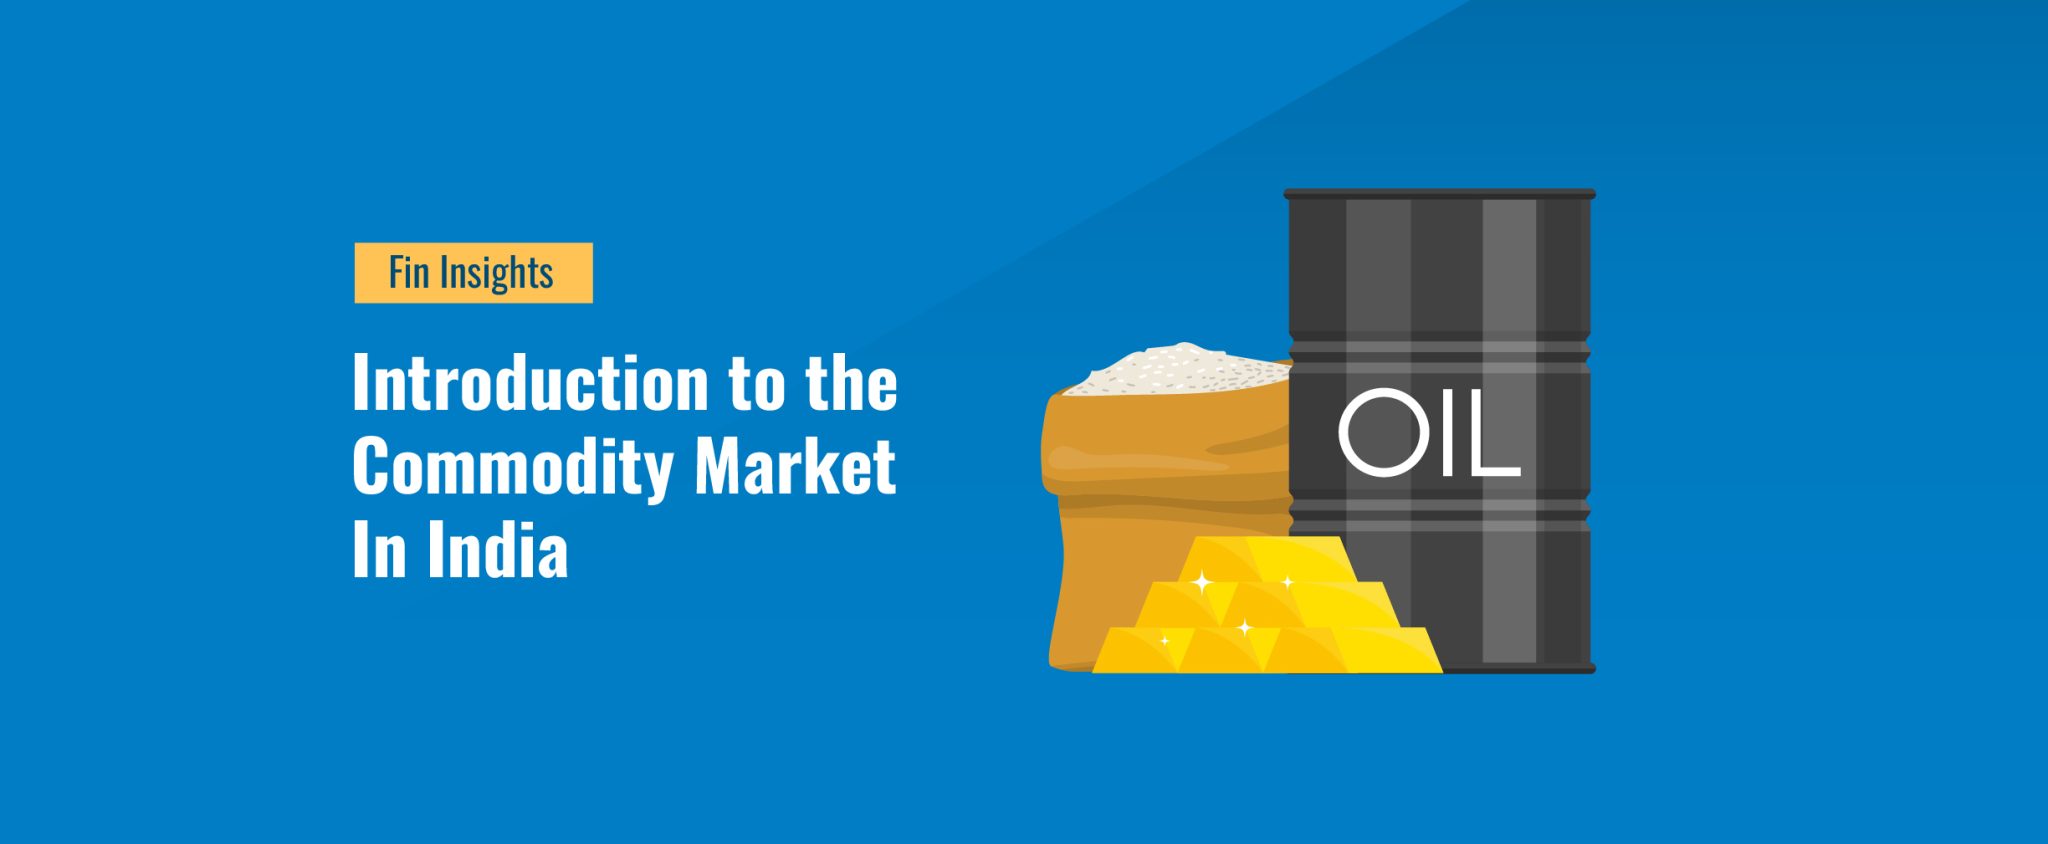 Commodity Market In India: A Beginner’s Introduction